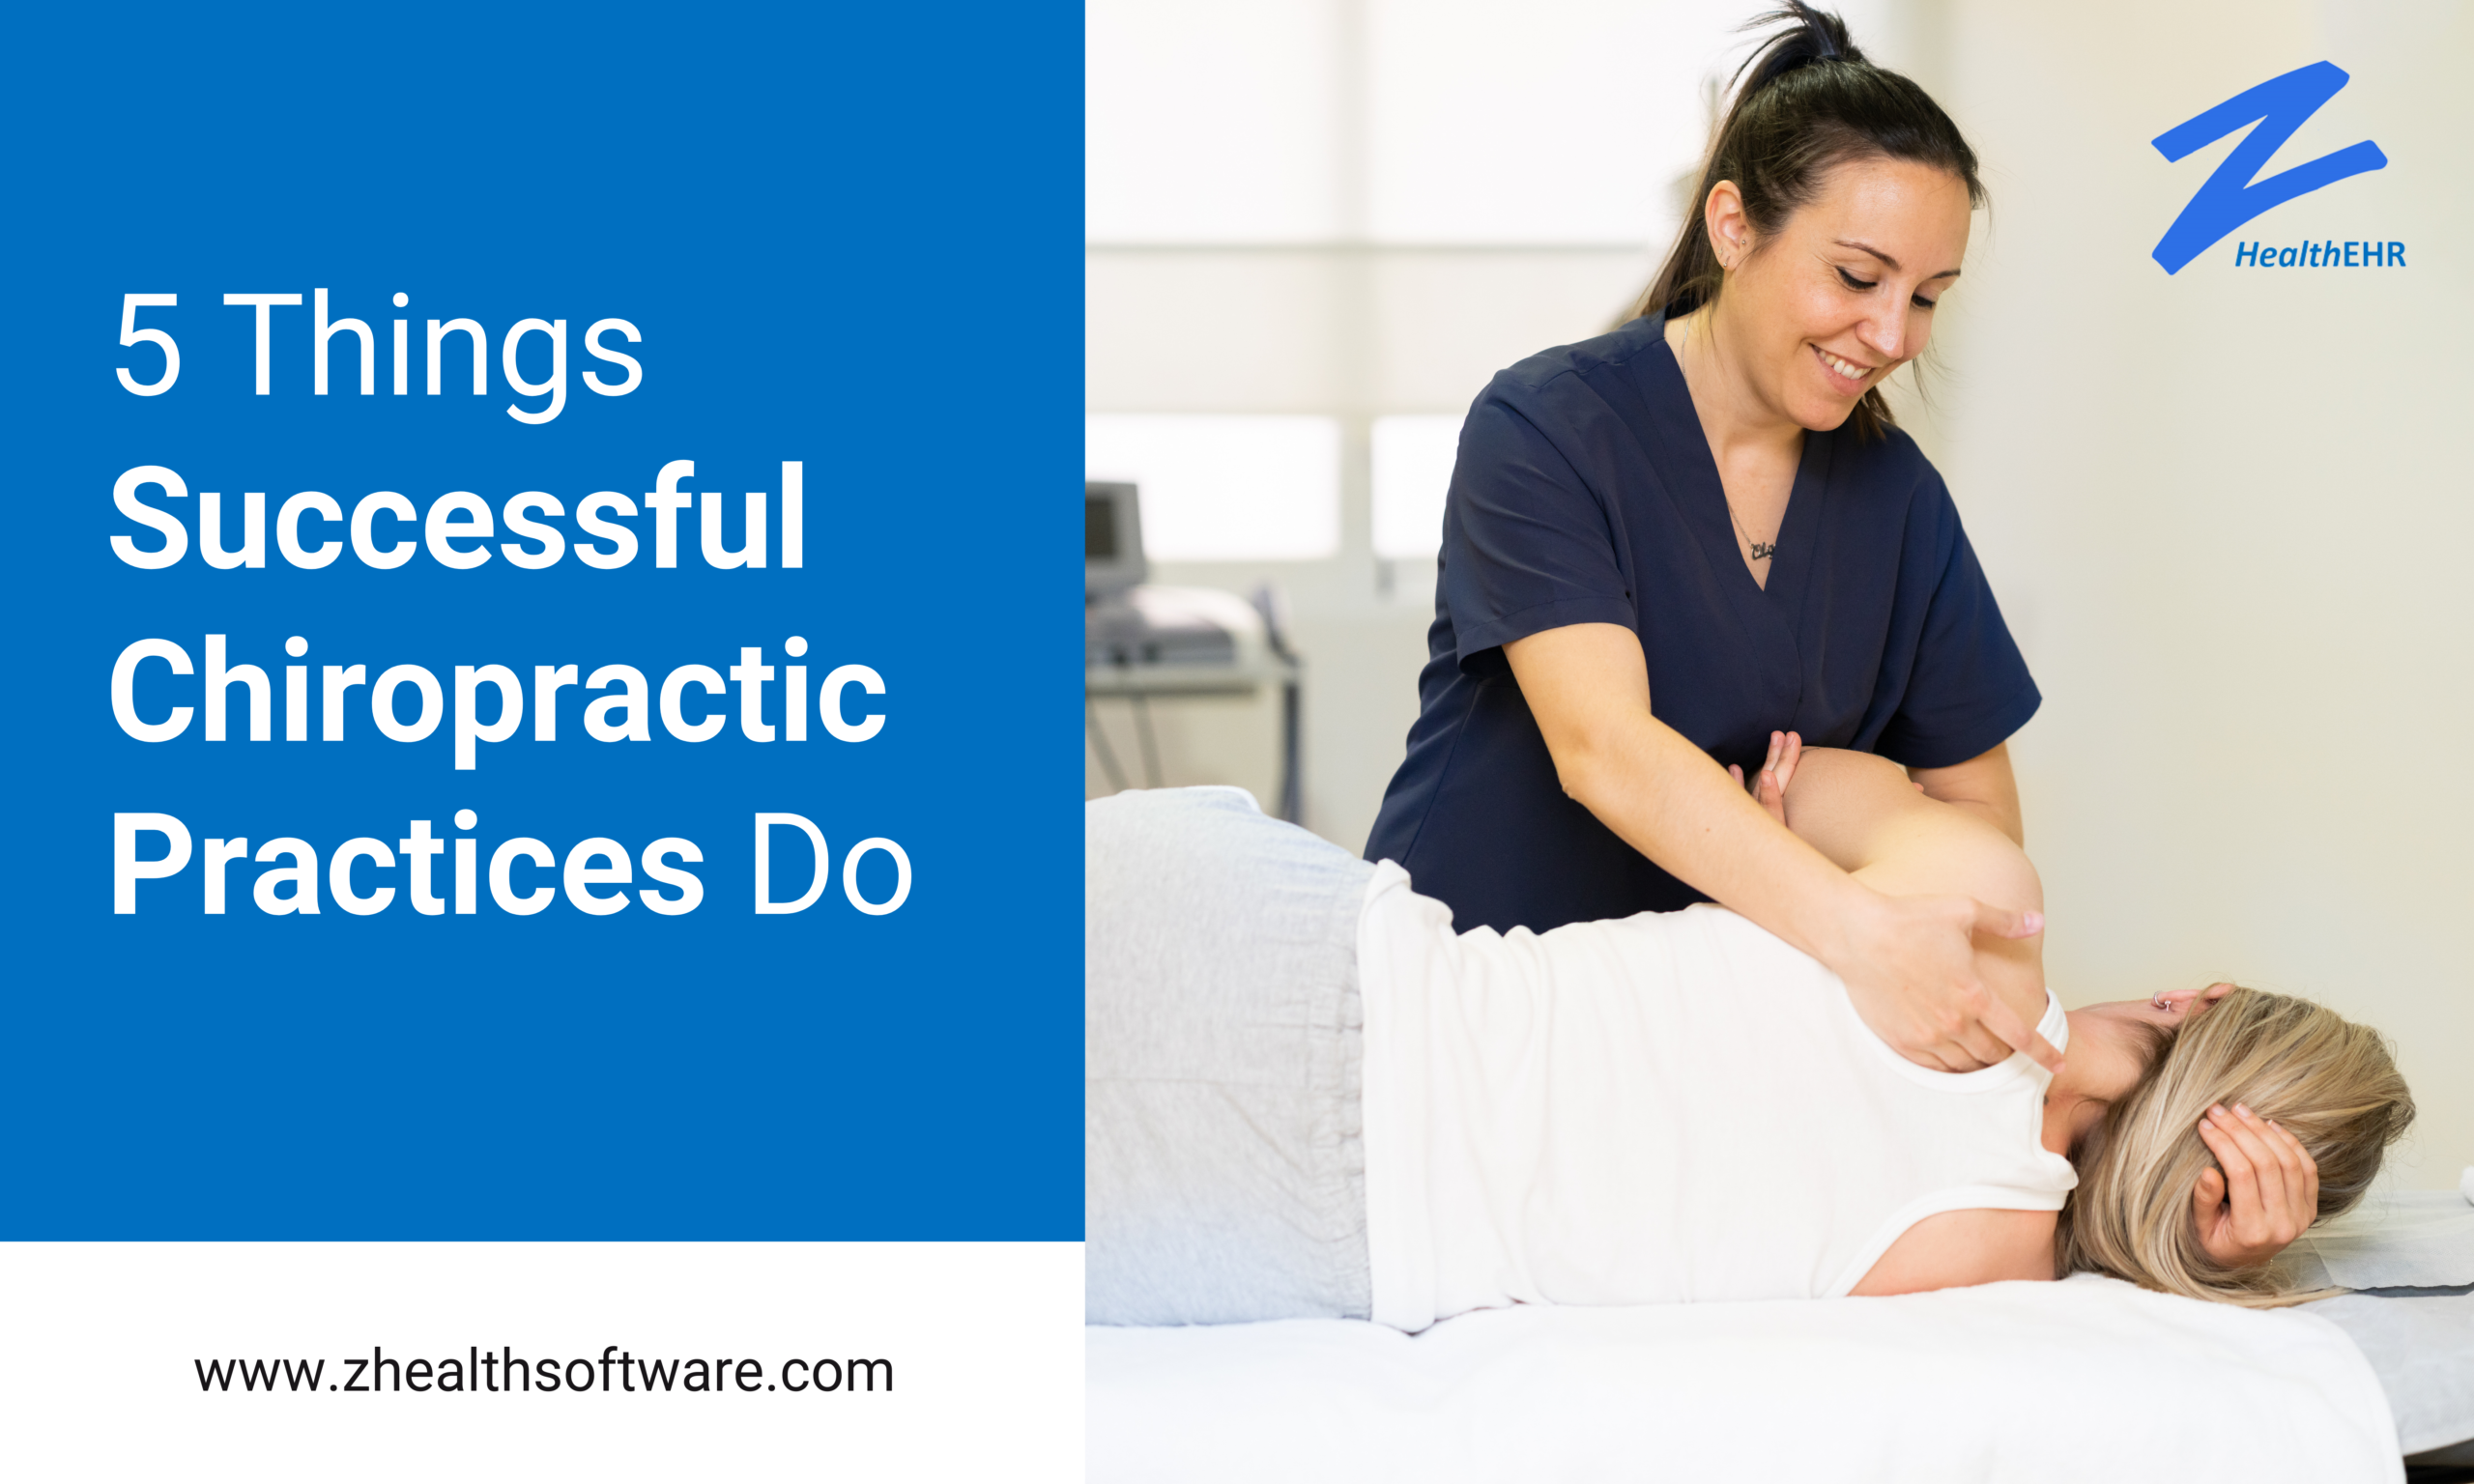 5 Things That Successful Chiropractic Practices Do